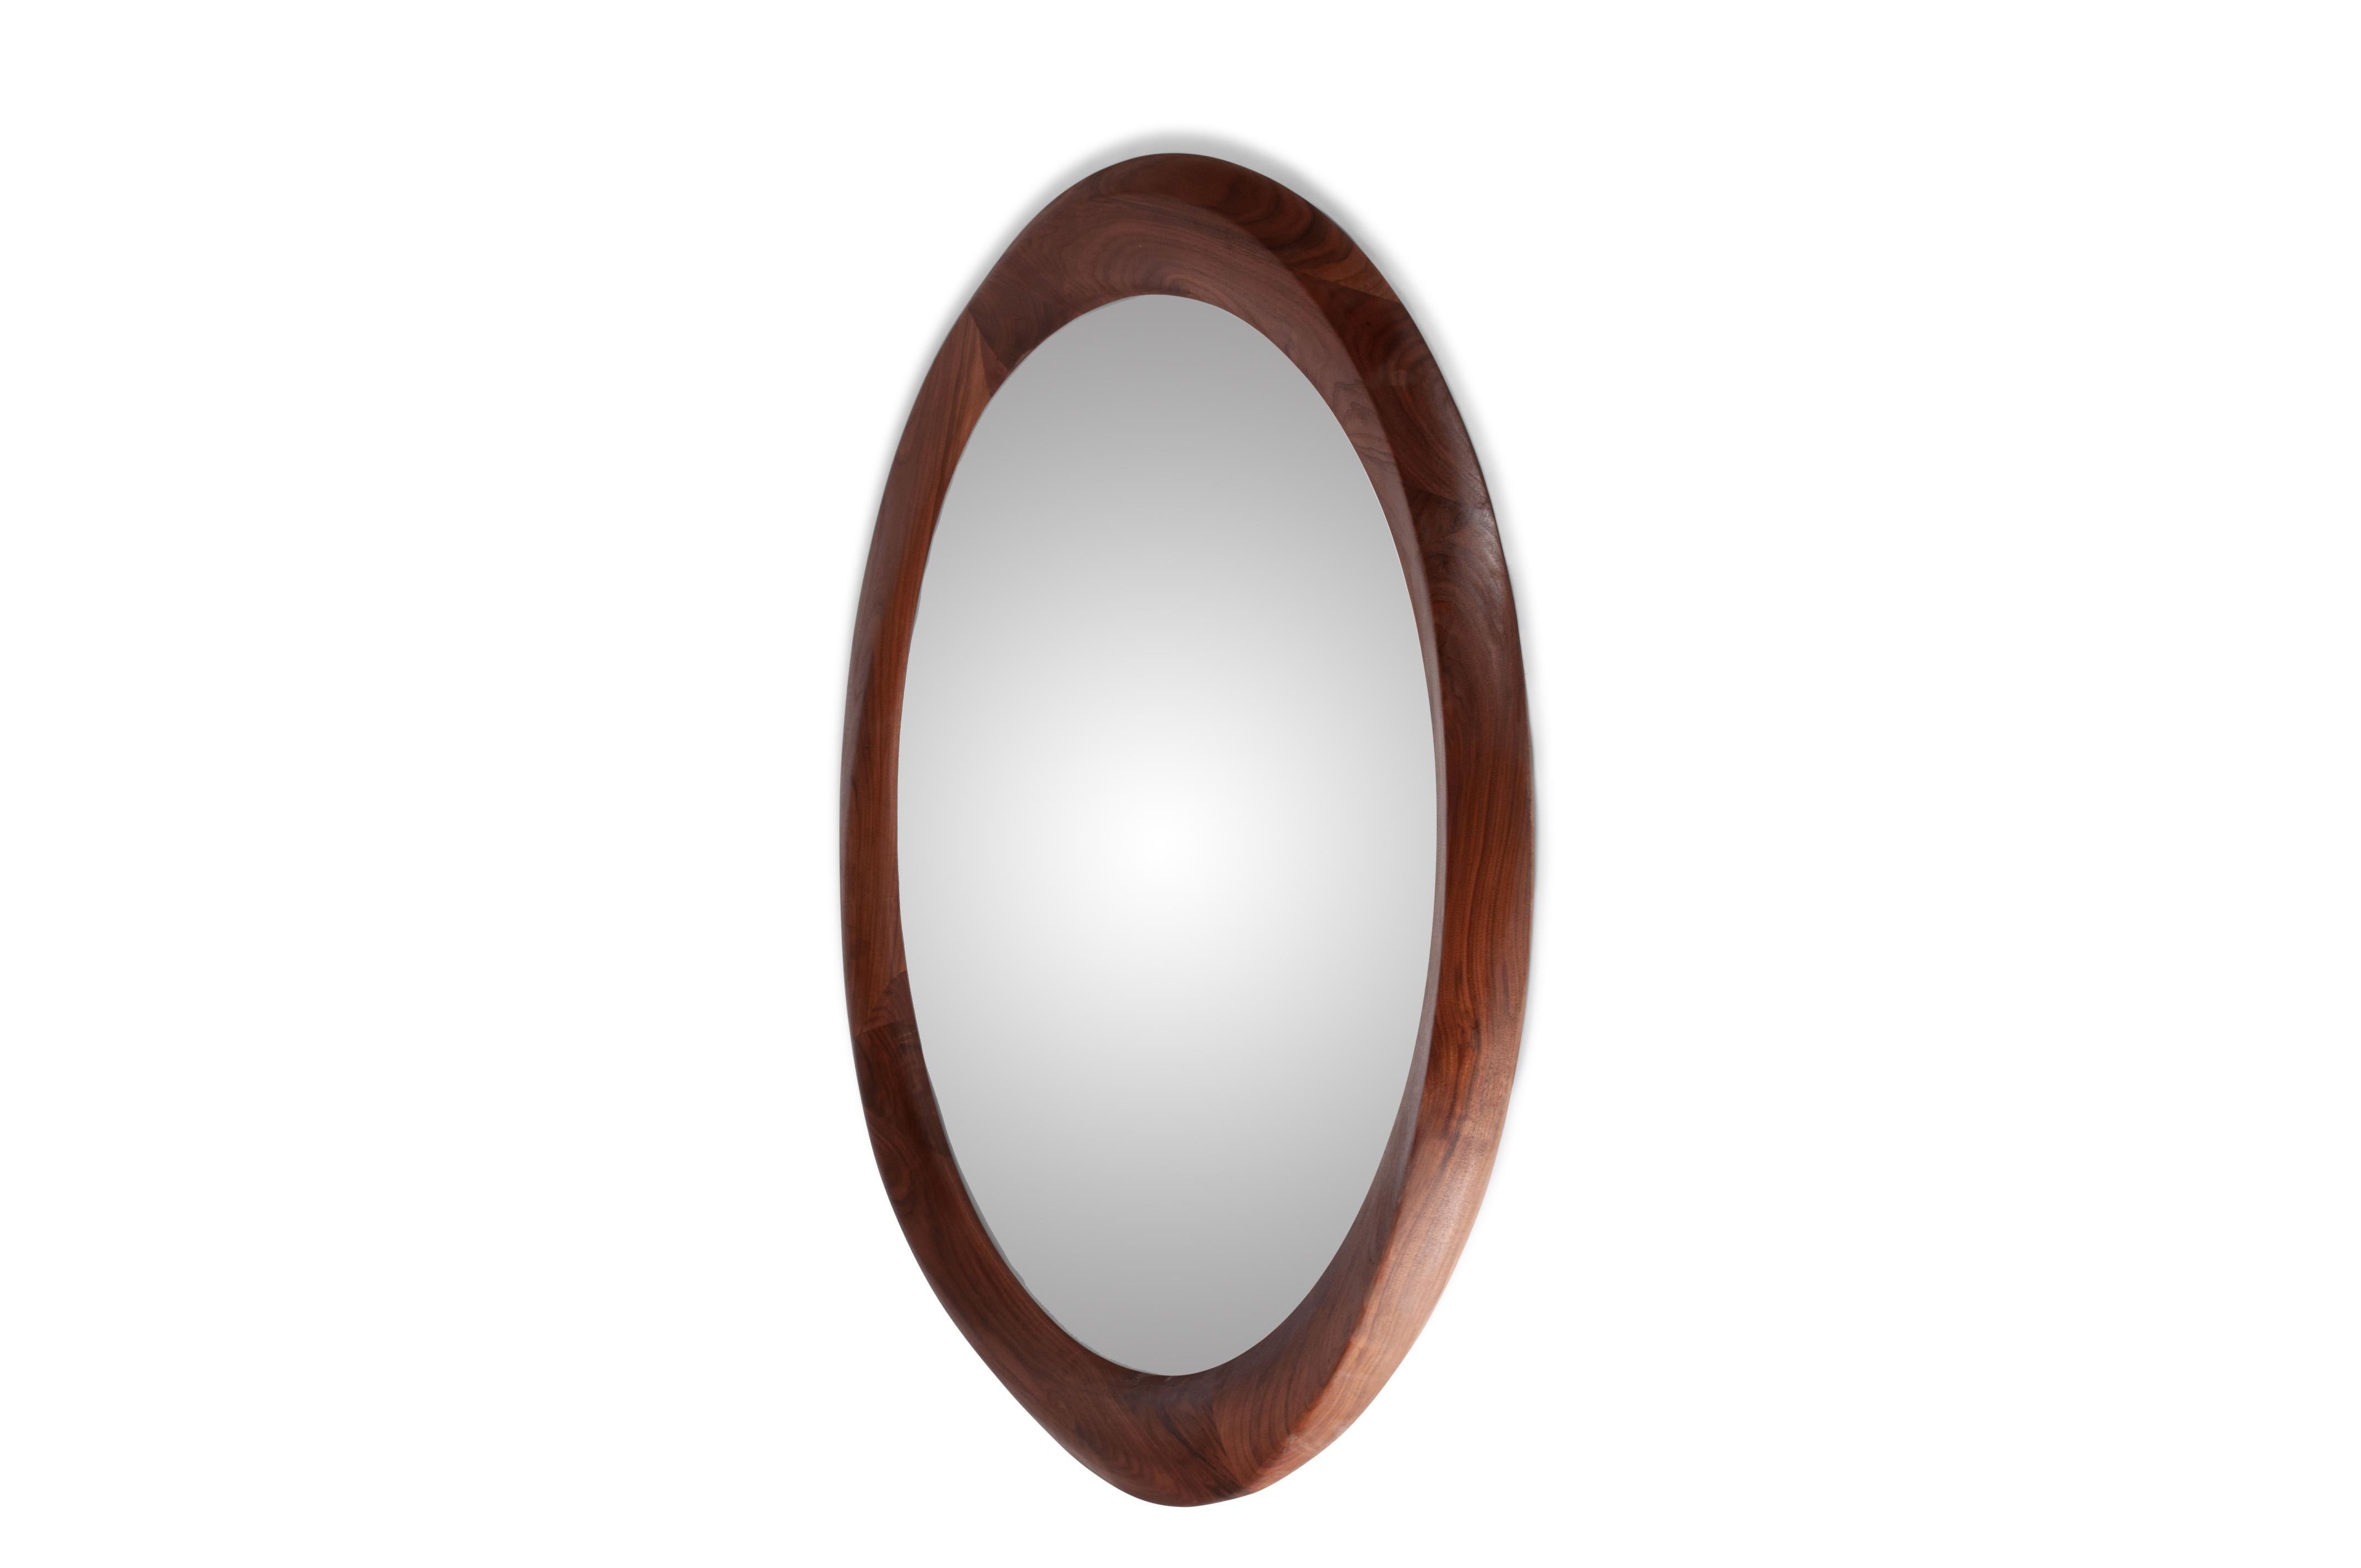 Amorph Contemporary Chiara Mirror Solid Walnut Wood Natural Stain In New Condition For Sale In Los Angeles, CA